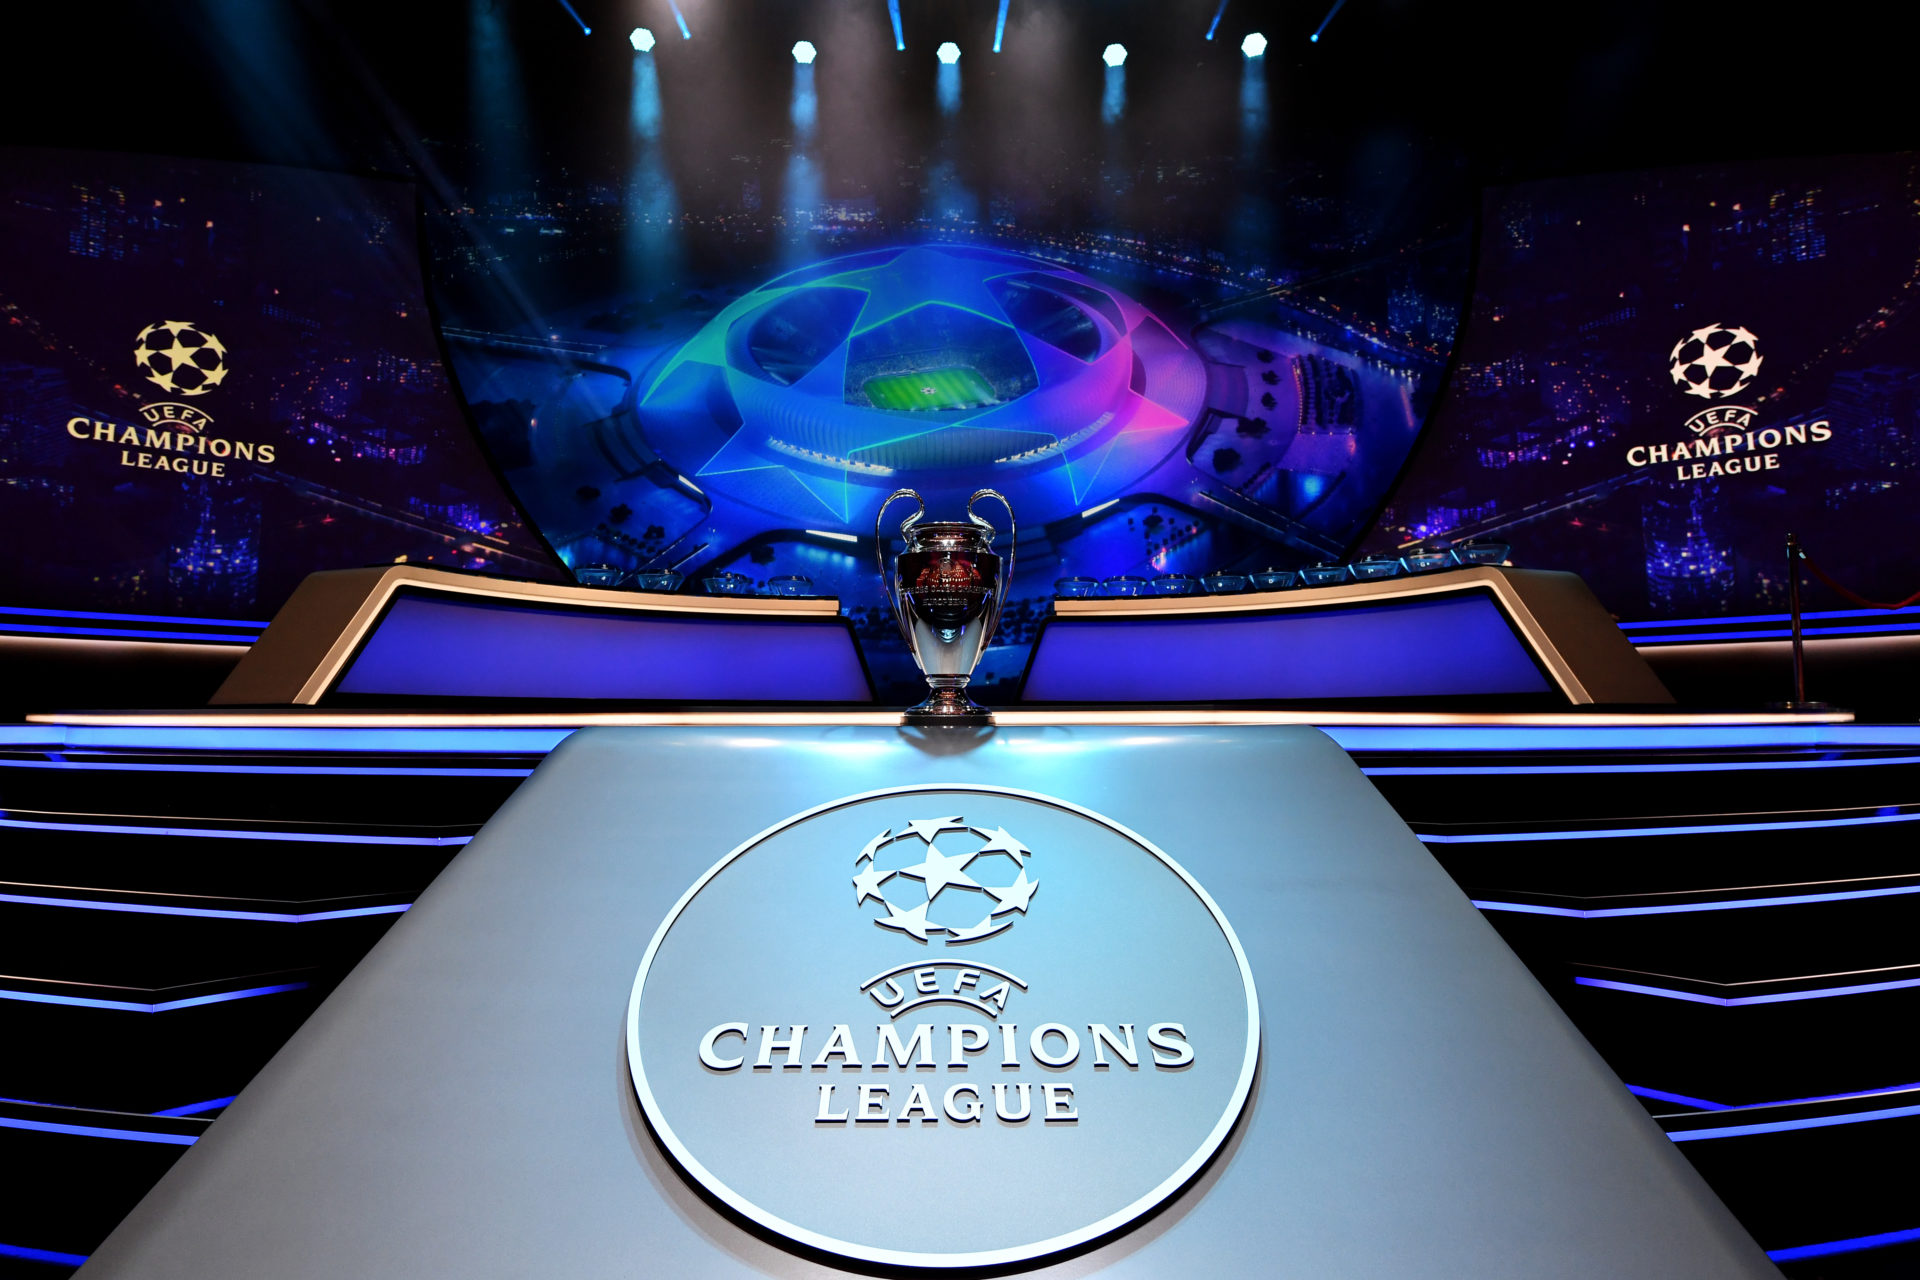 Champions League: All the fixtures and results | UEFA Champions League |  UEFA.com